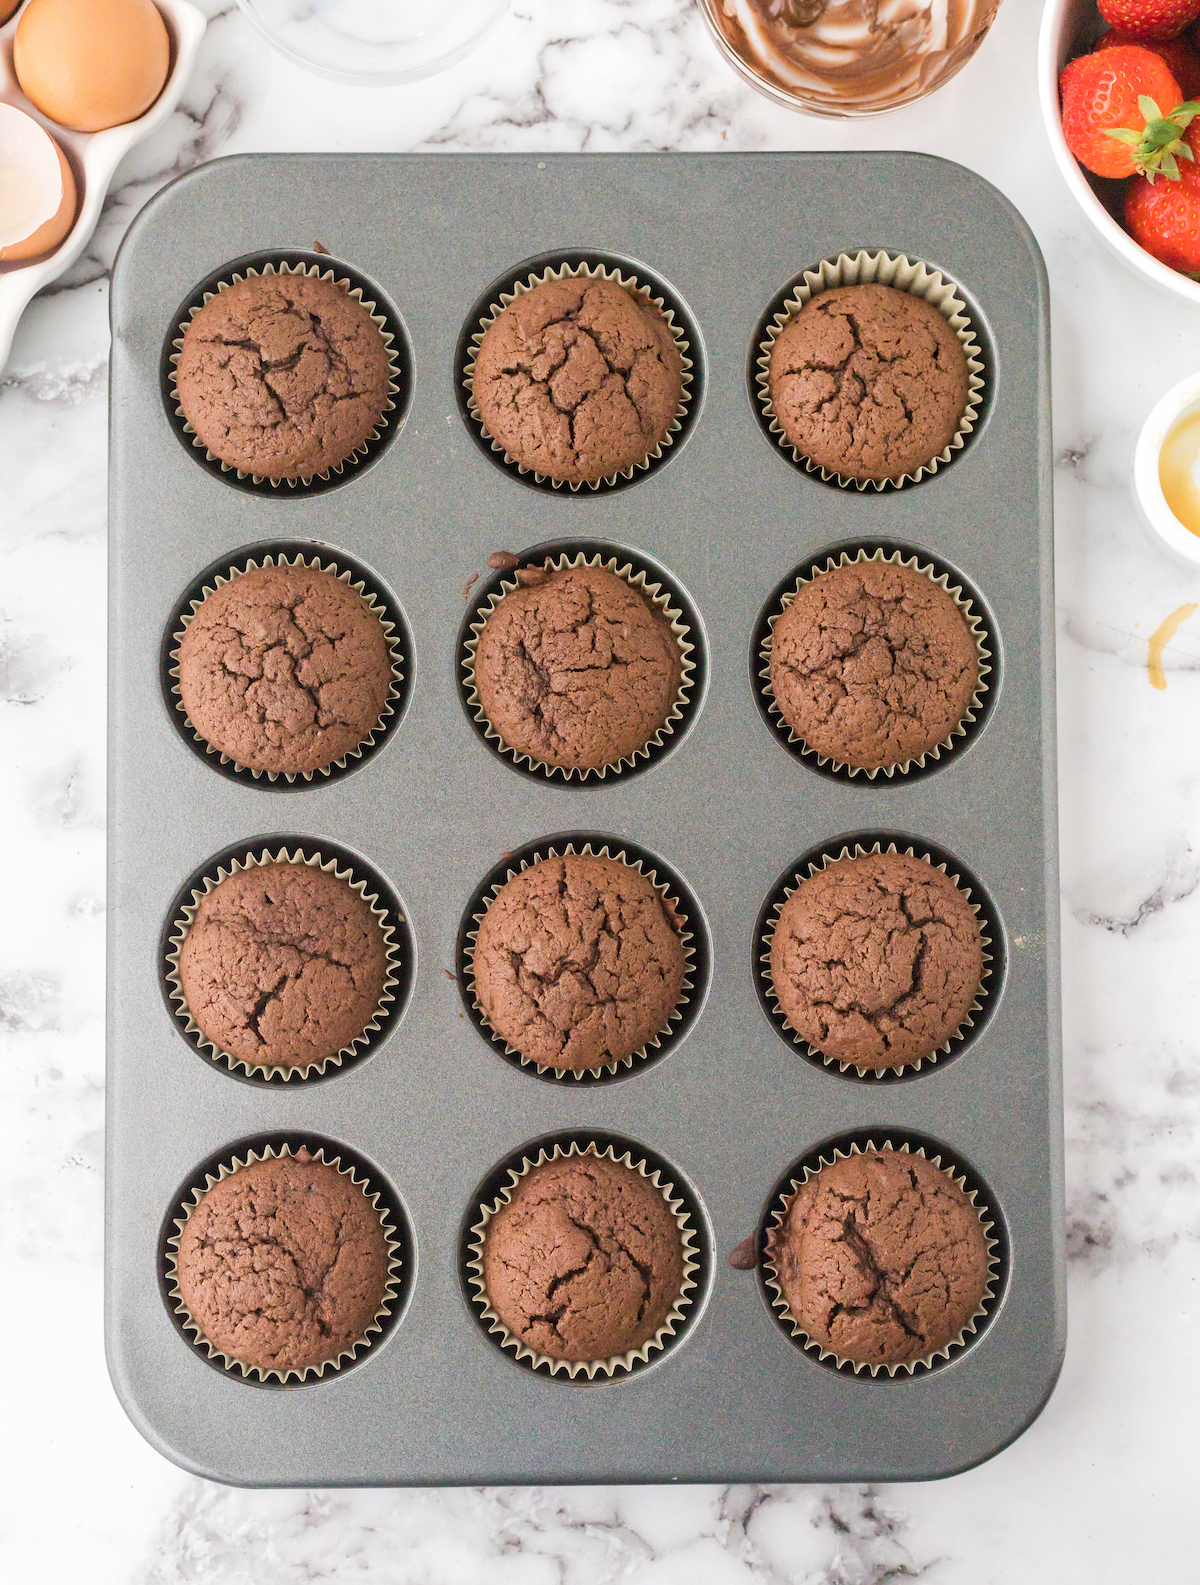 Baked Nutella cupcakes in a cupcake pan